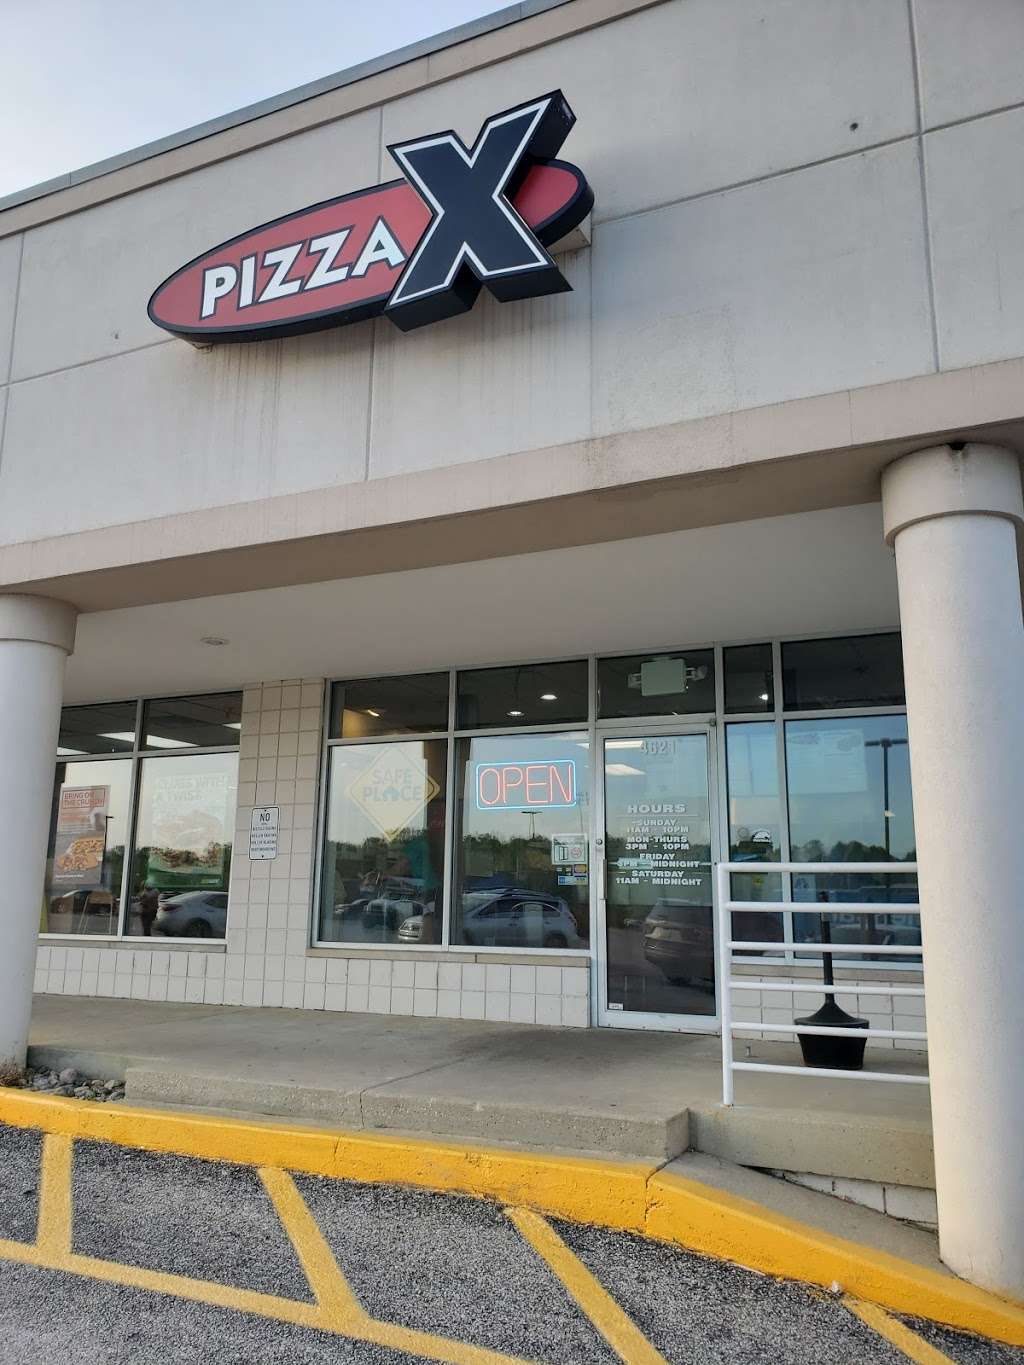 Pizza X | 4621 W Richland Plaza Dr, Bloomington, IN 47404, USA | Phone: (812) 876-4443